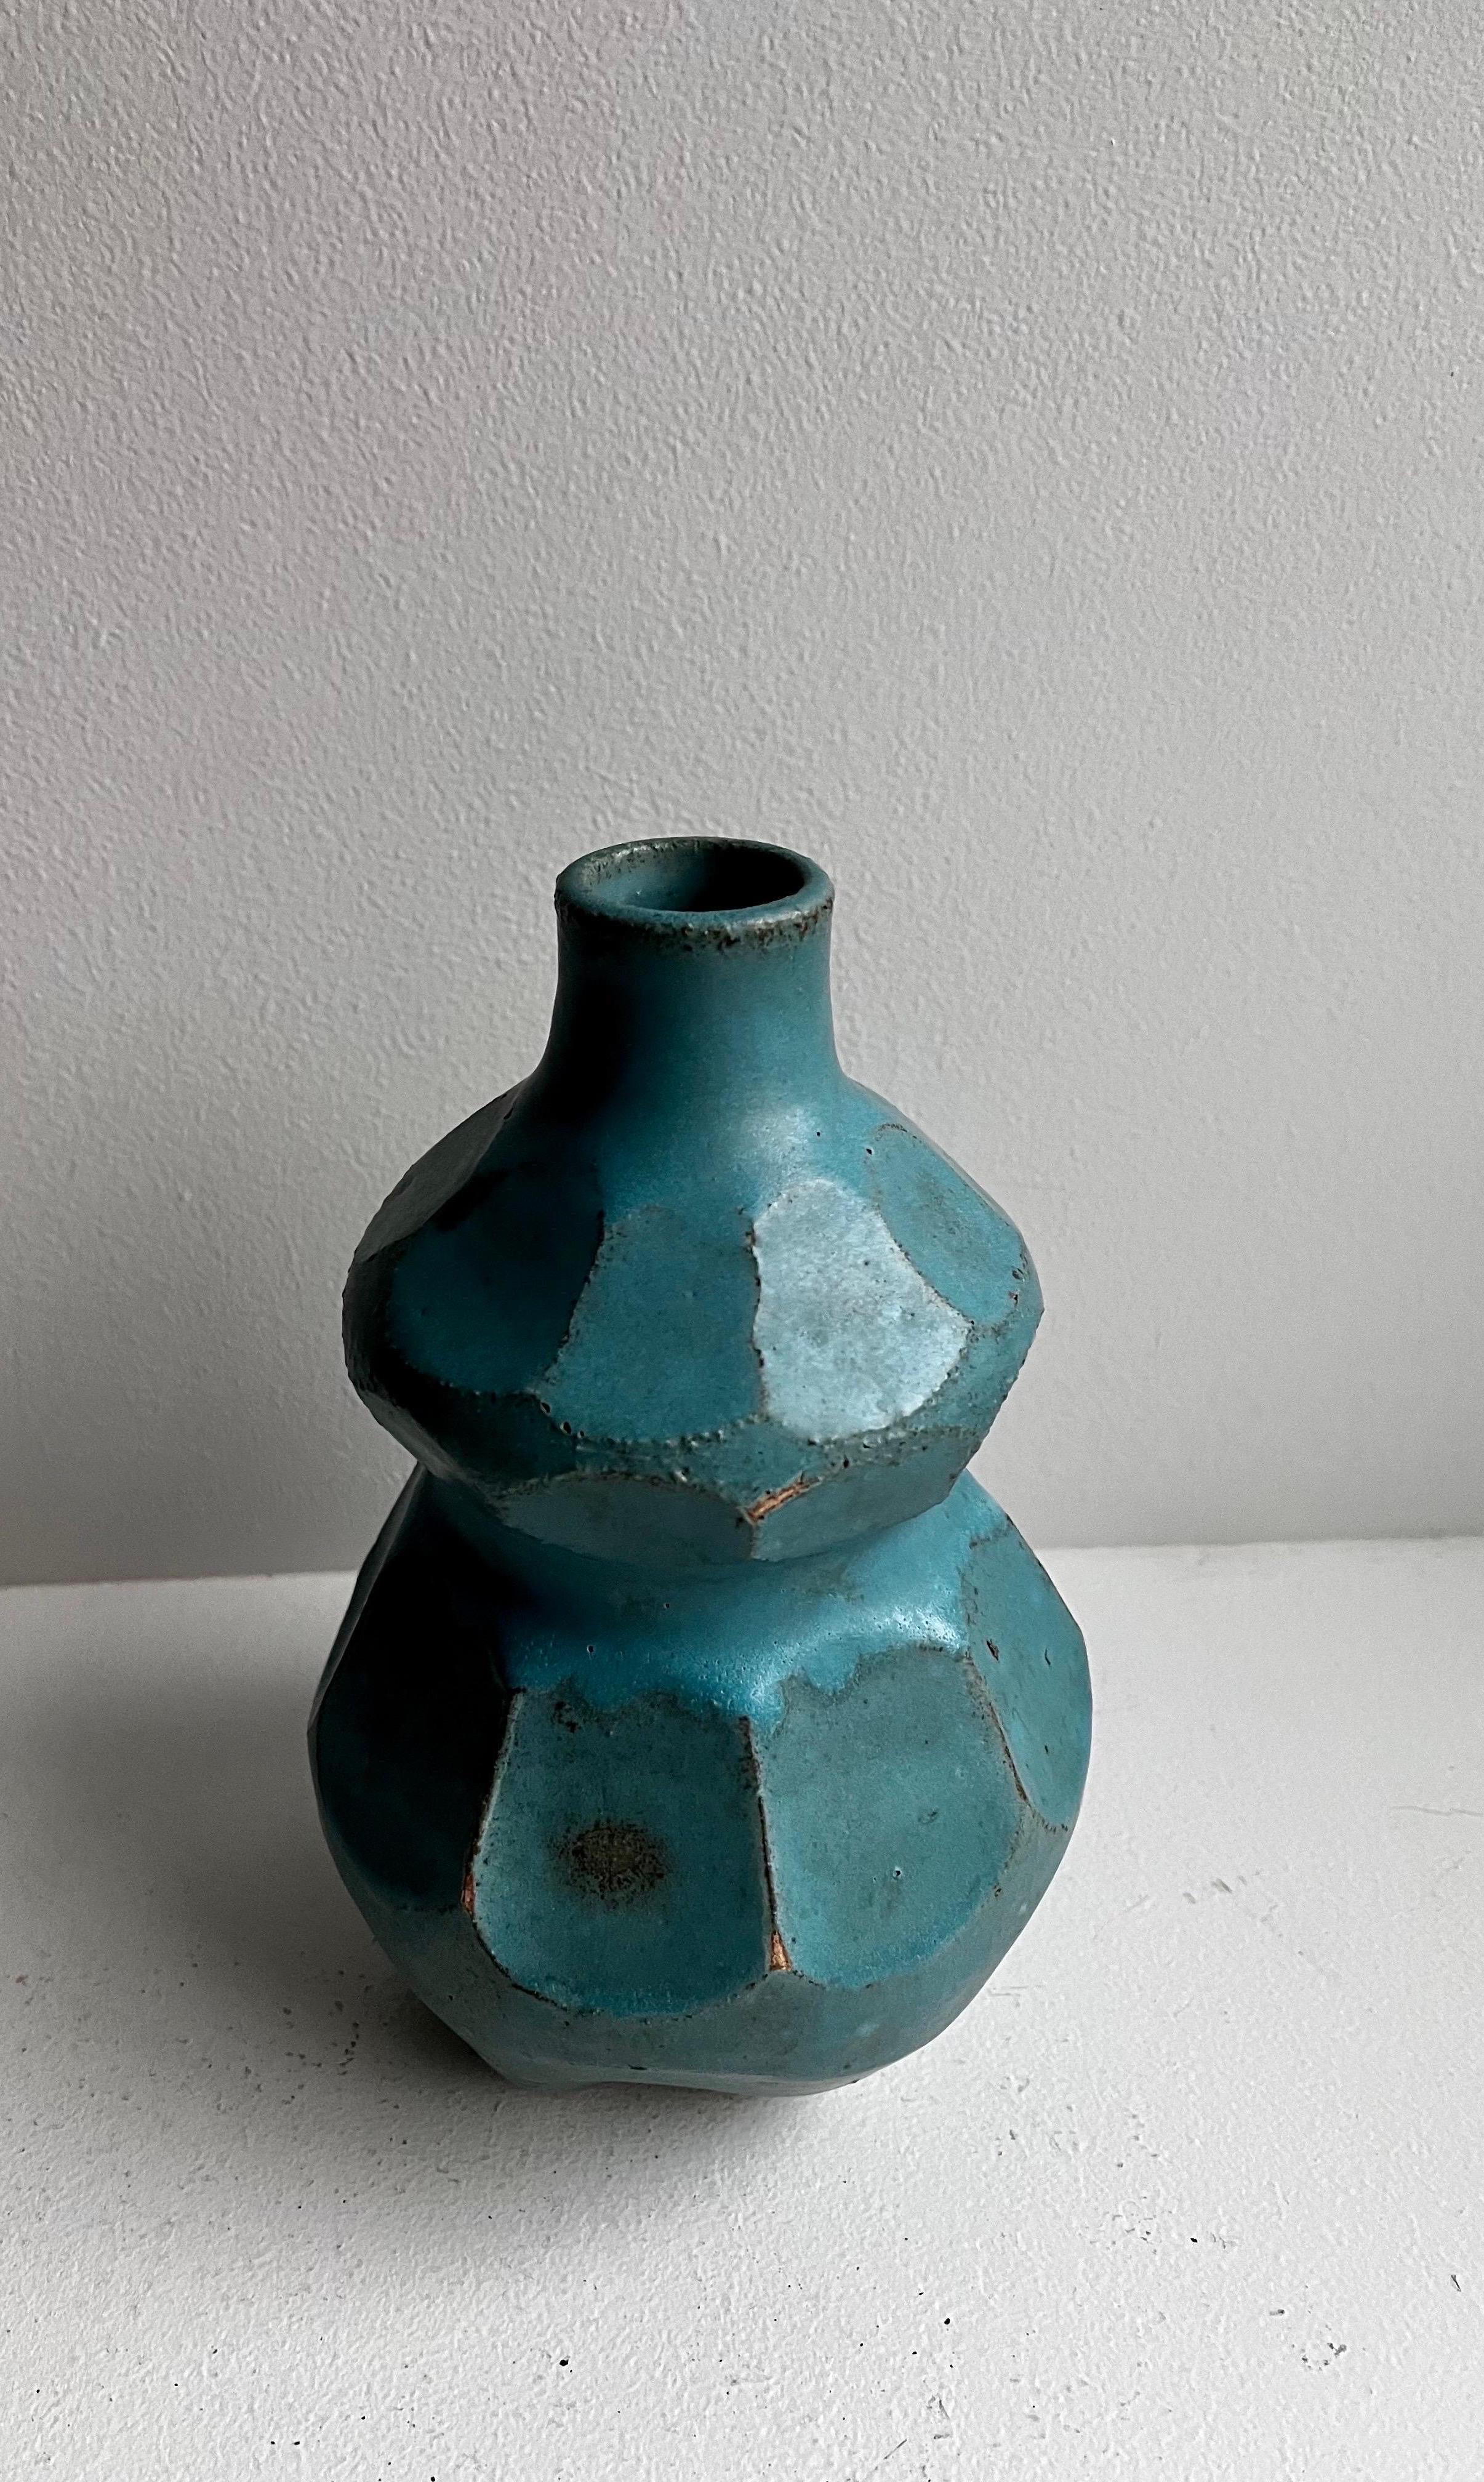 Art Pottery by artist Walter Darby Bannard, 1978 (sold separately) For Sale 9